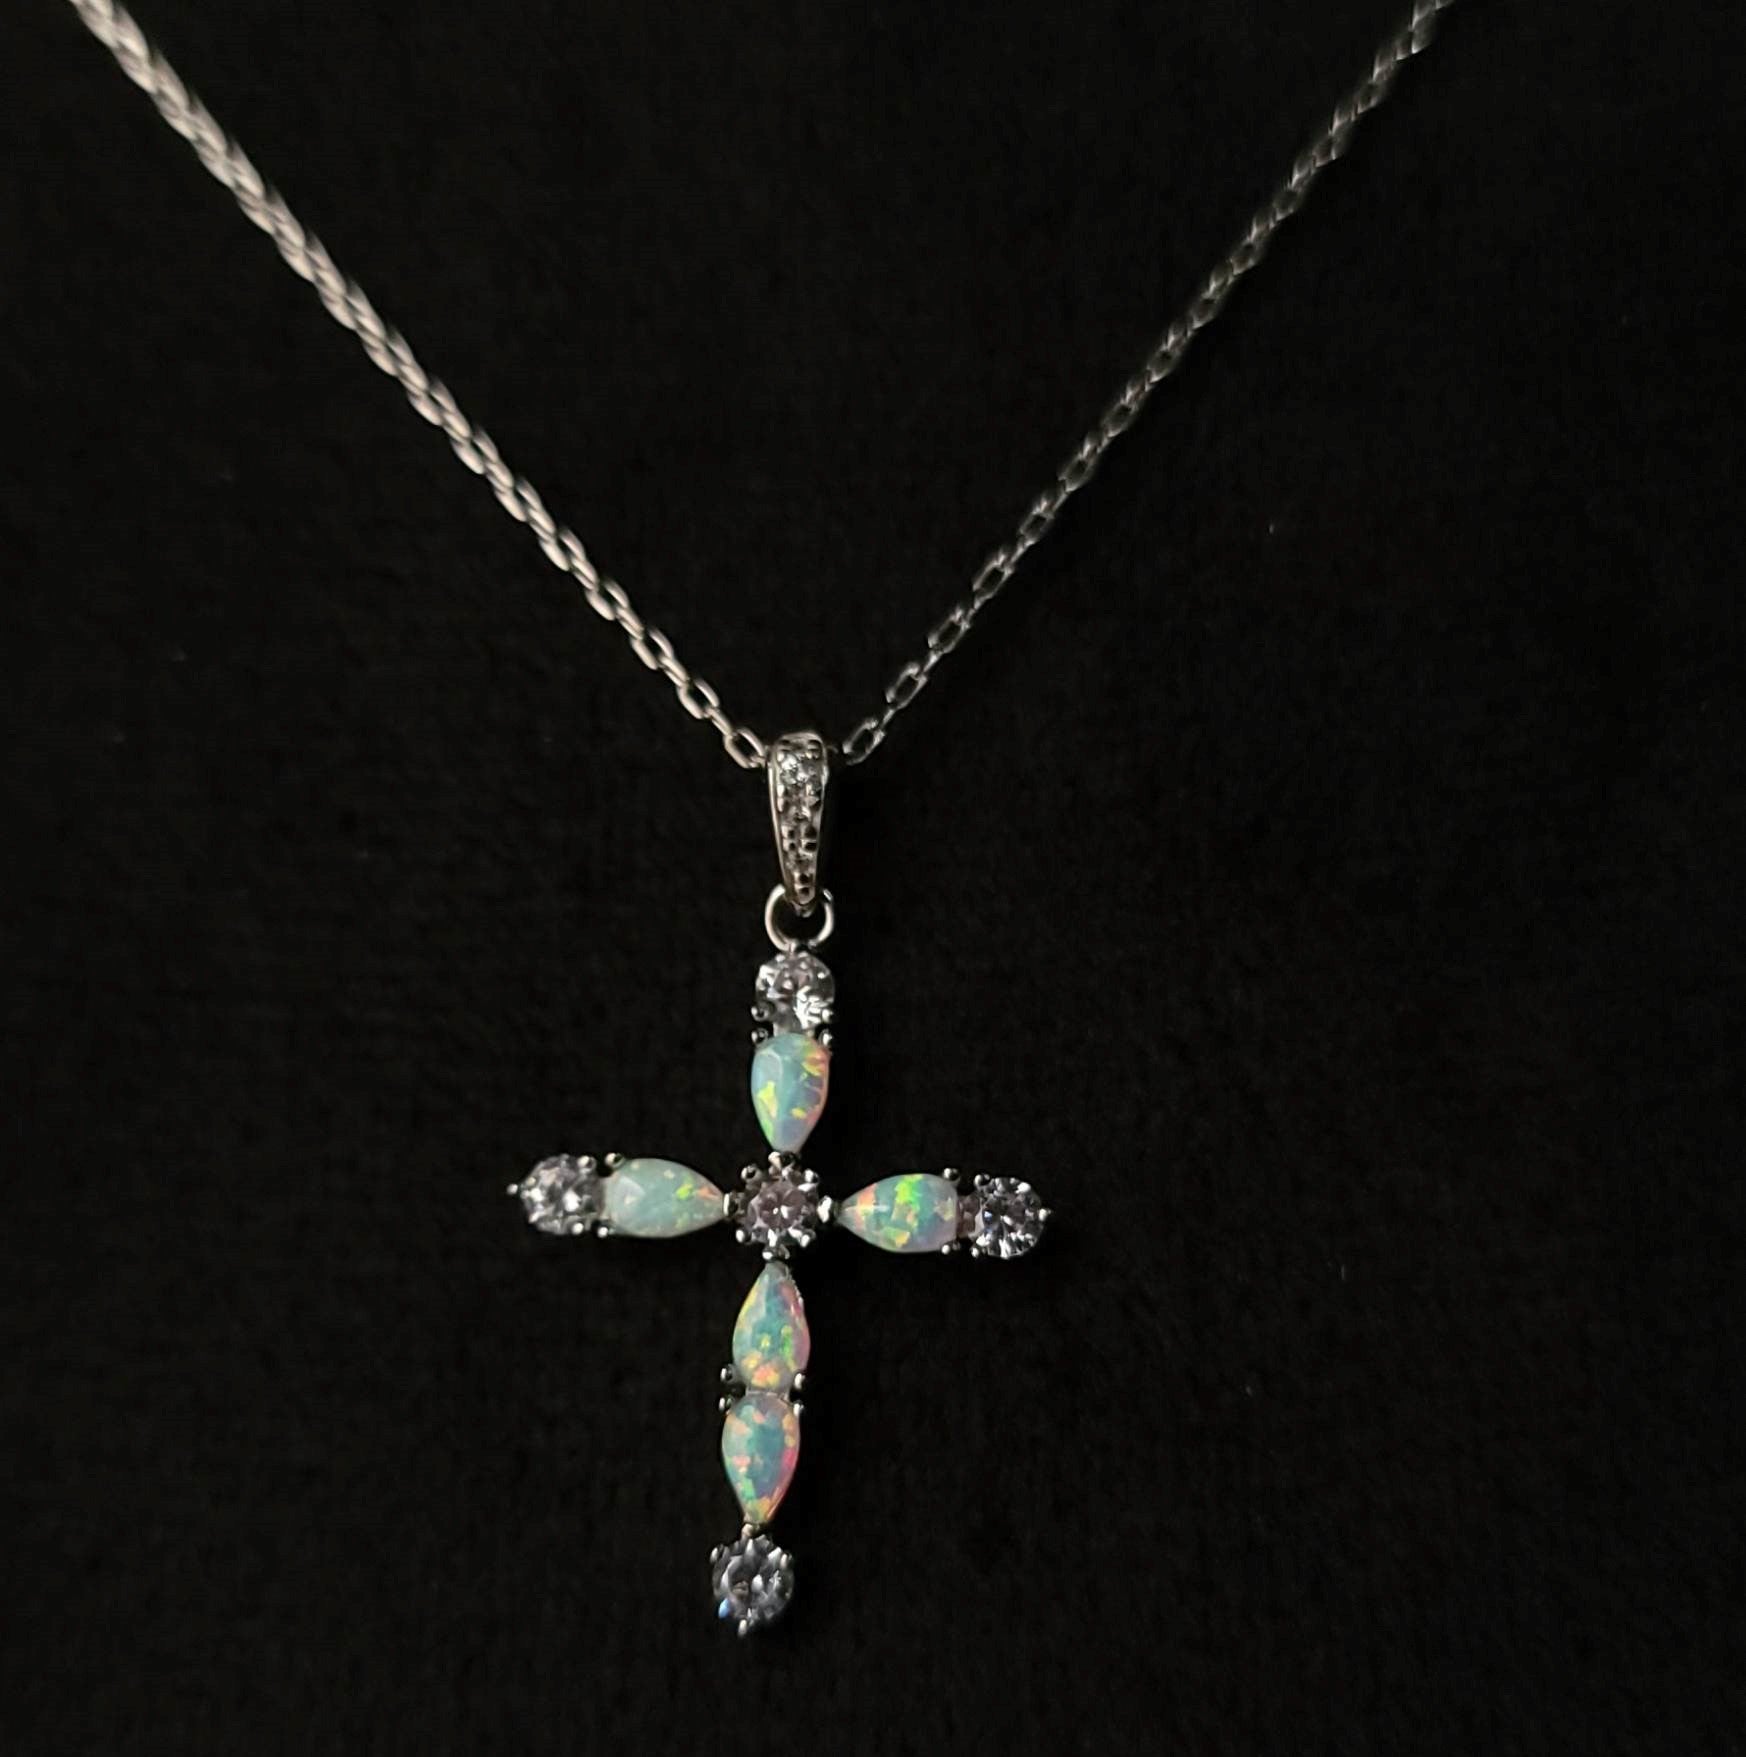 Gorgeous White Iridescent Opal Cross with CZ Accents on Sterling Silver Adjustable Chain